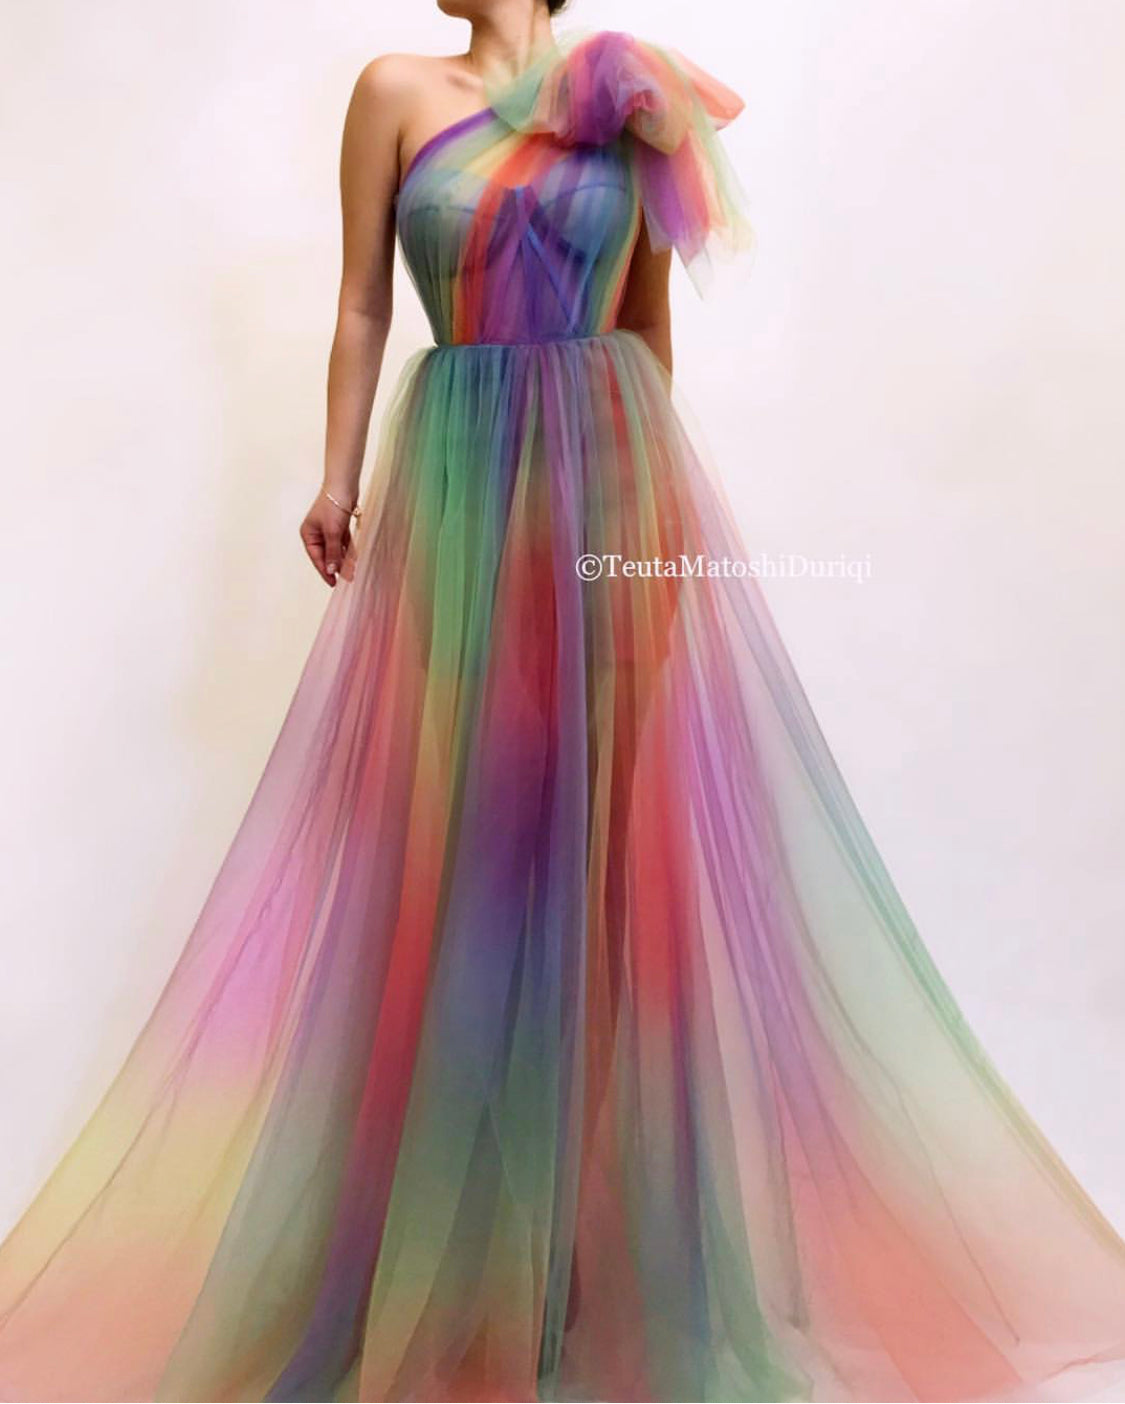 Colorful A-Line dress with one shoulder sleeve